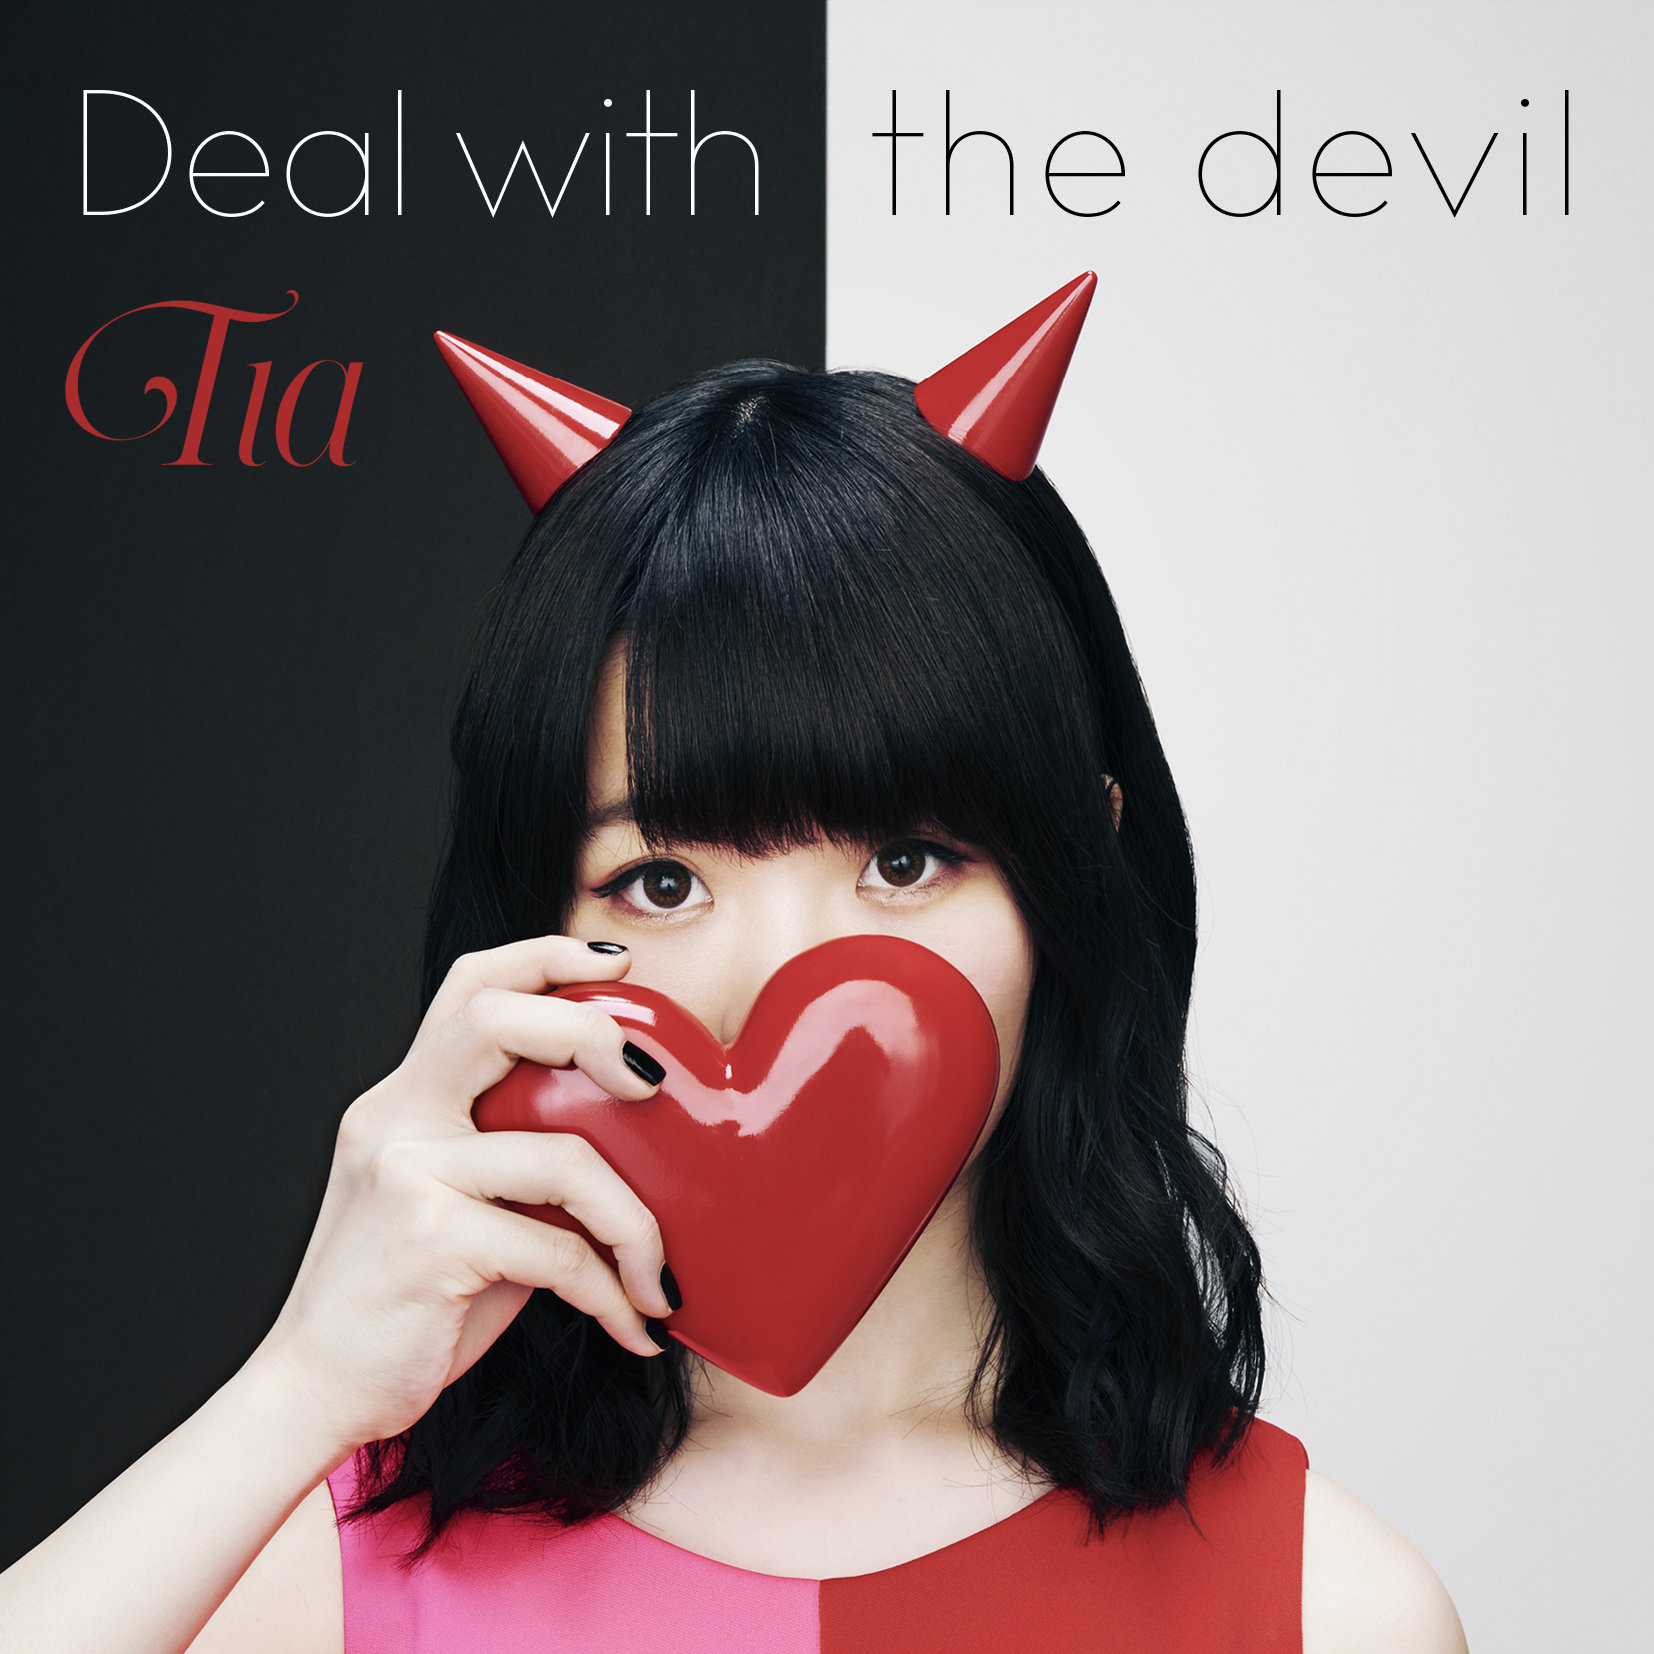 Dealing with the devil. Tia deal with the Devil. Deal with the Devil Kakegurui. Deal with the Devil by Tia.